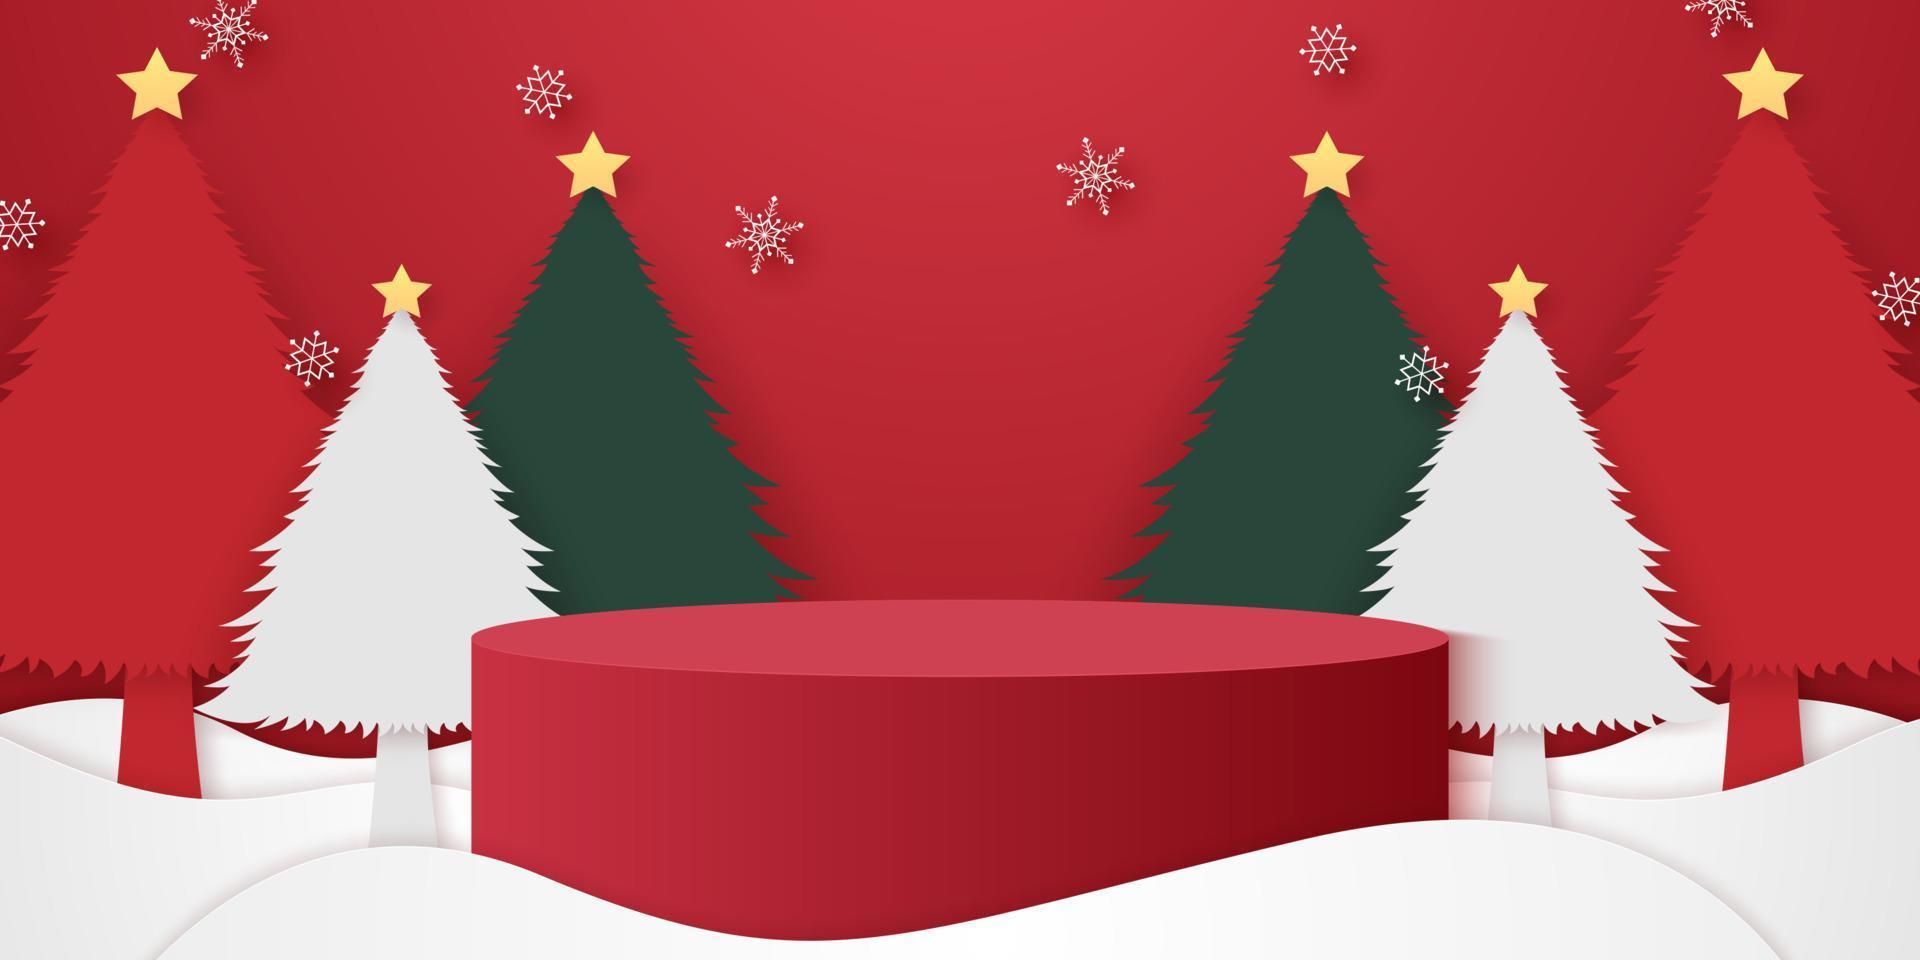 Red cylinder podium on snow with Christmas trees and snowflakes falling, template mockup for event in paper art vector